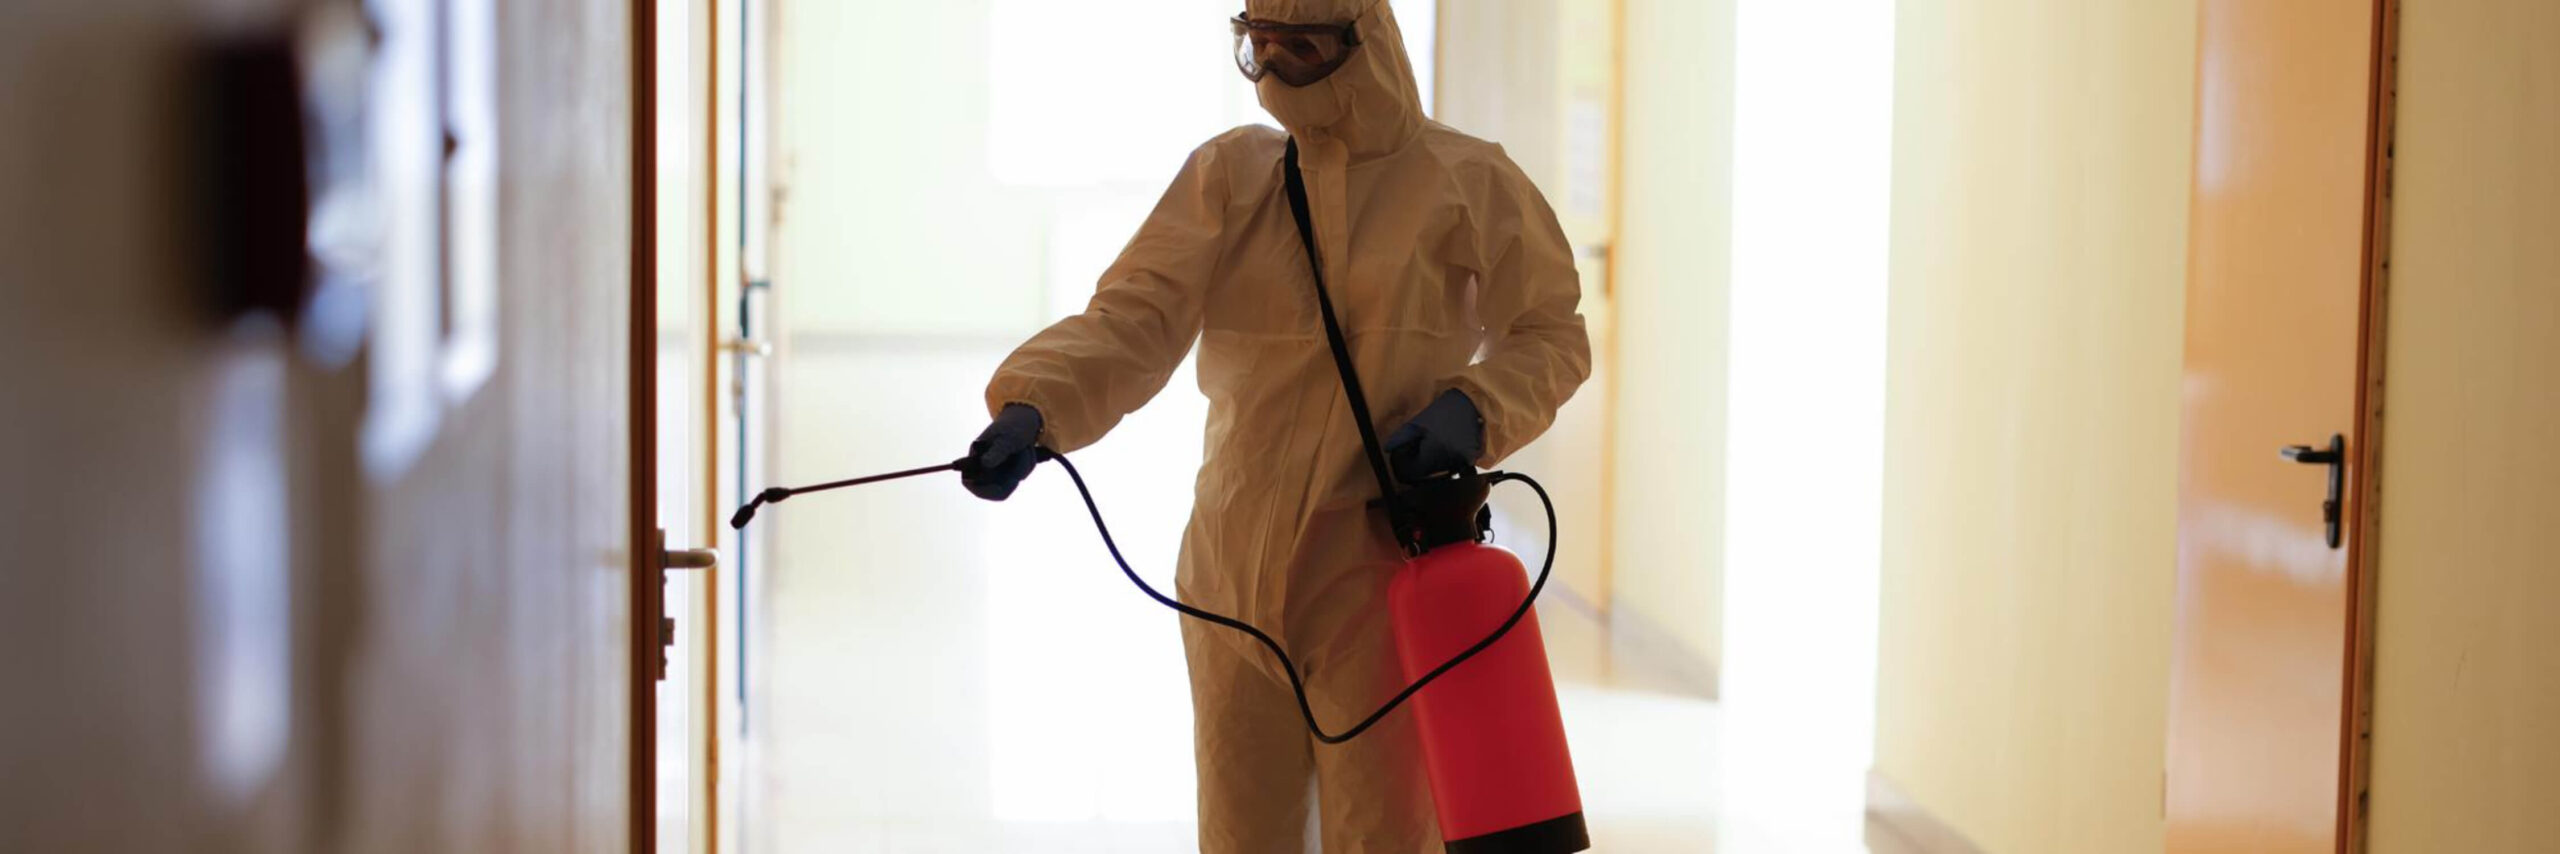 How to Prevent Mold Infestations in Your Home and Stay Healthy